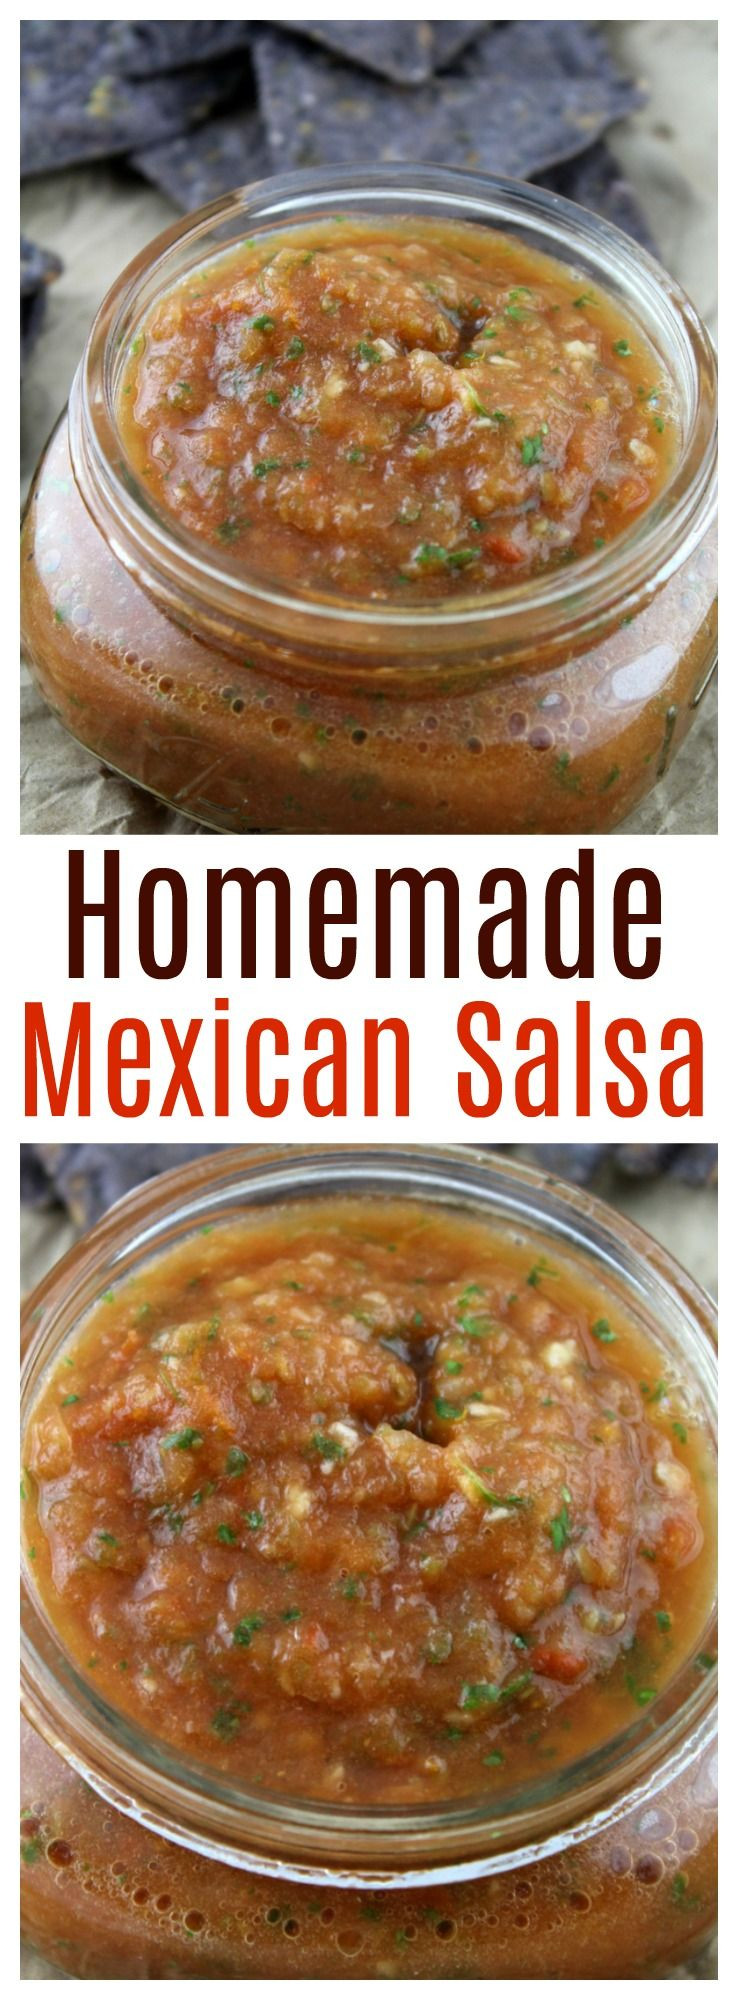 Authentic Salsa Recipe
 Whip up this easy authentic homemade Mexican salsa in